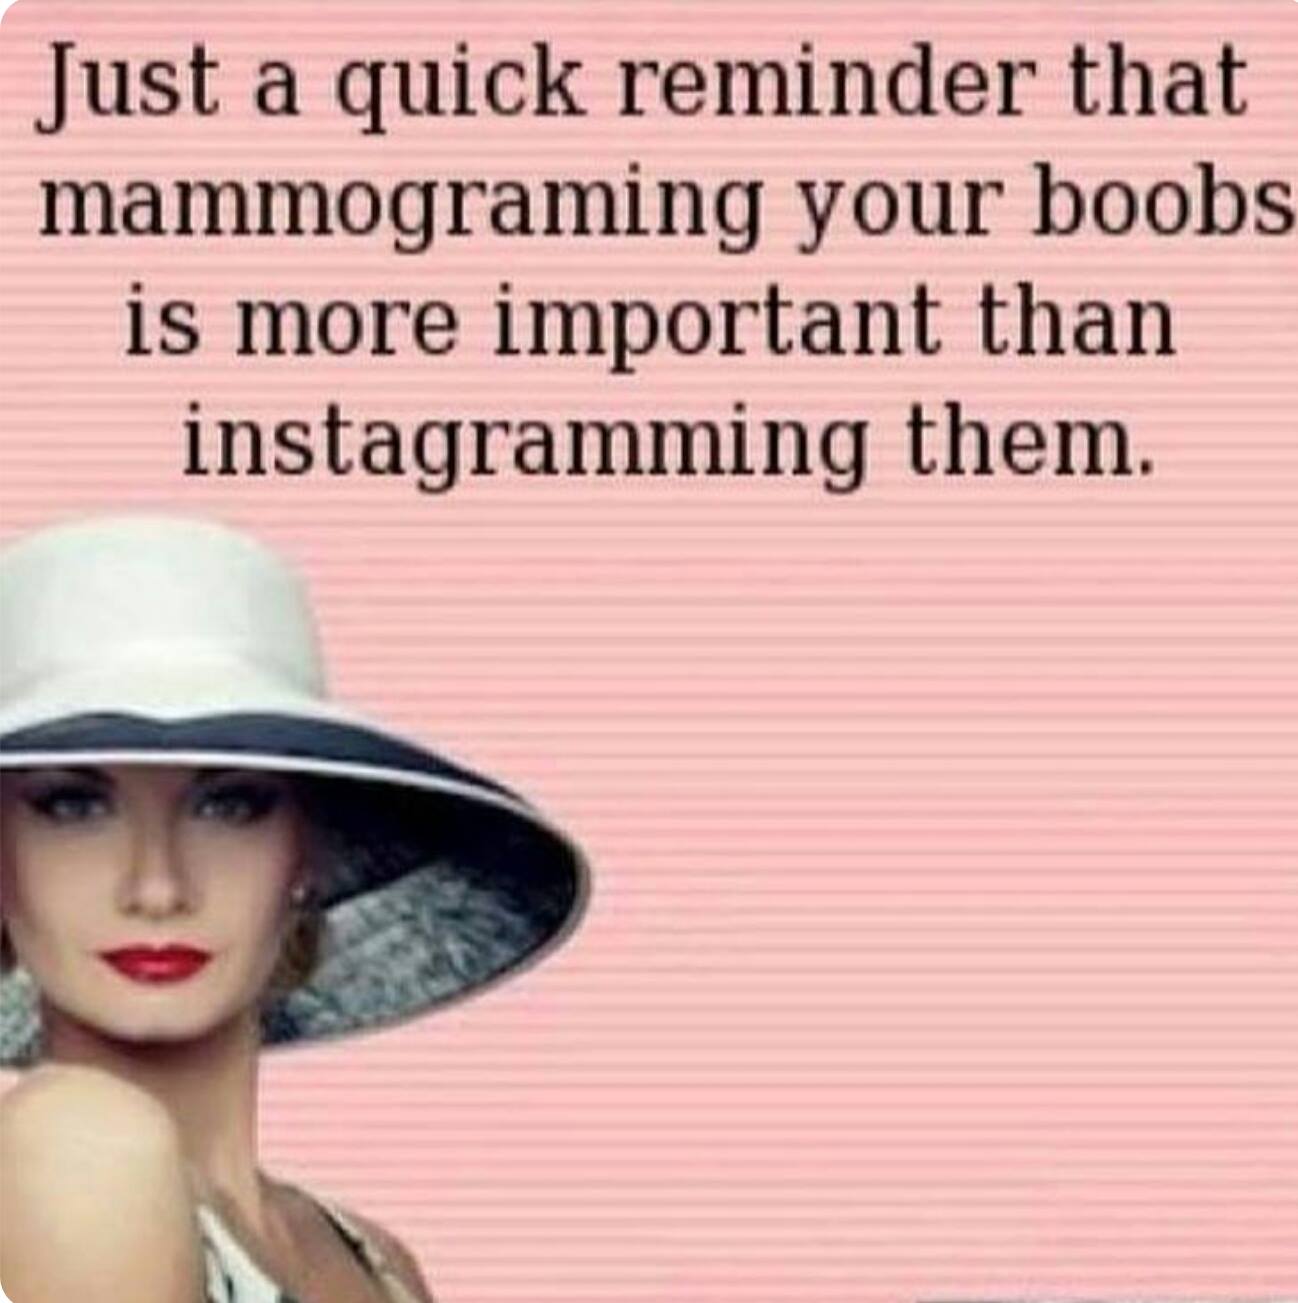 Better Beauty Vermont Just a quick reminder that mamogramming your boobs is more important than instagramming them